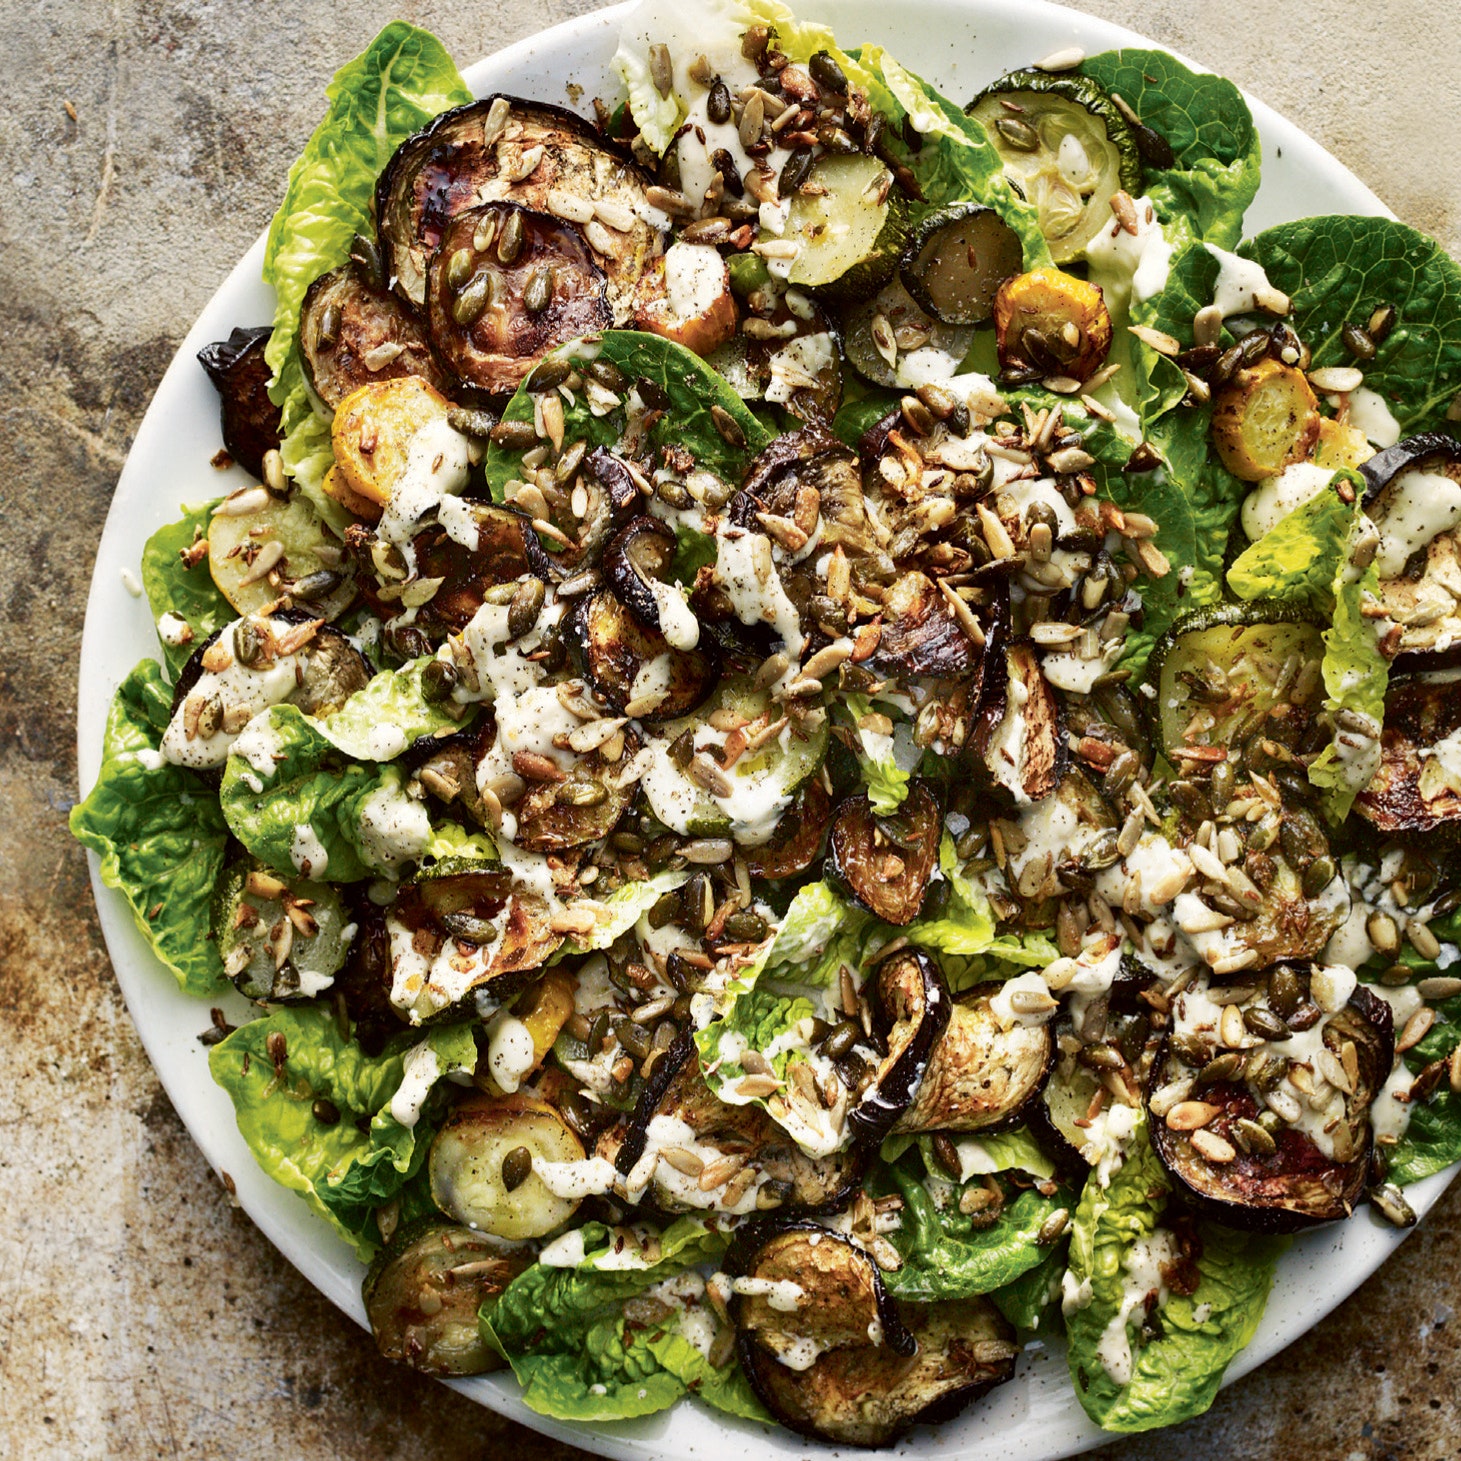 Aubergine, courgette salad with mint and tahini dressing